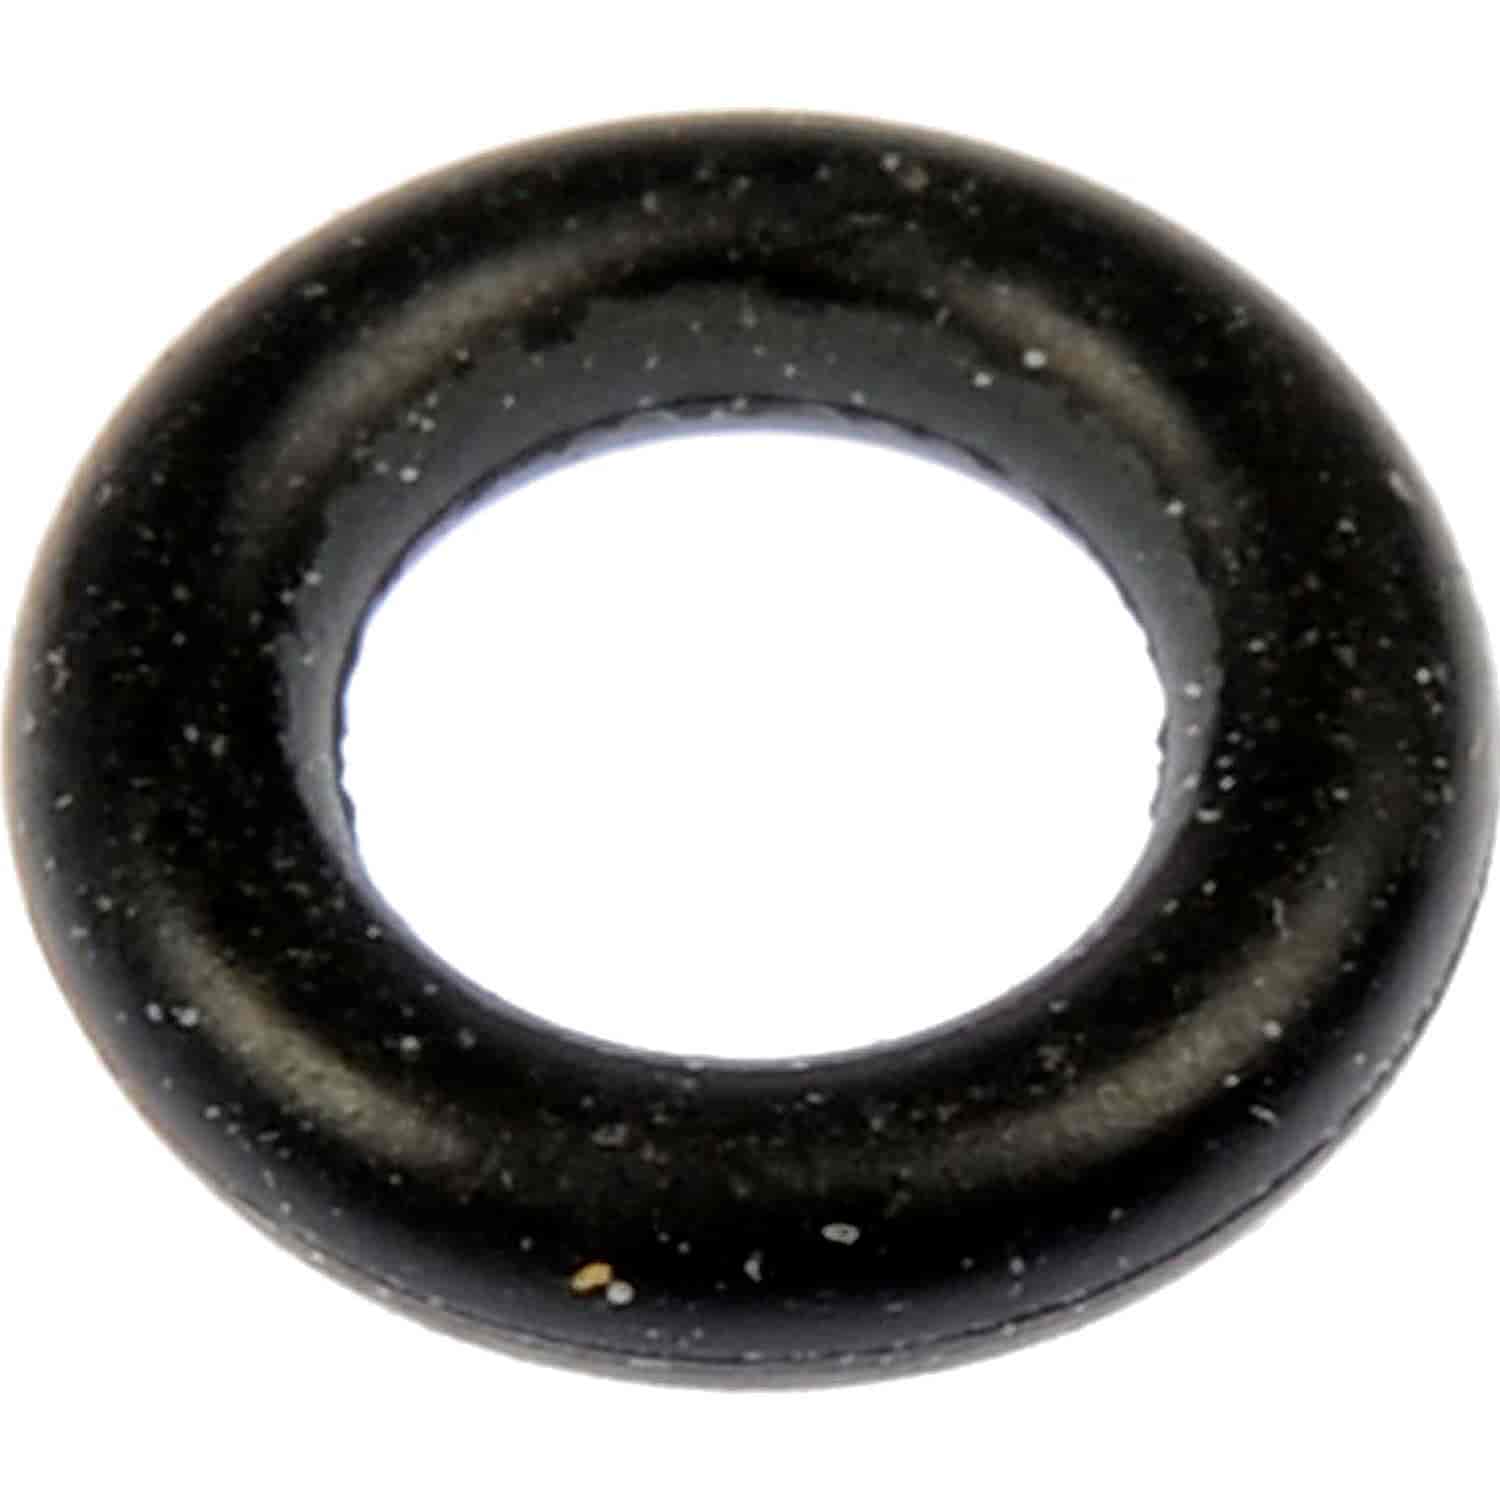 O-RINGS 5MMX9MM